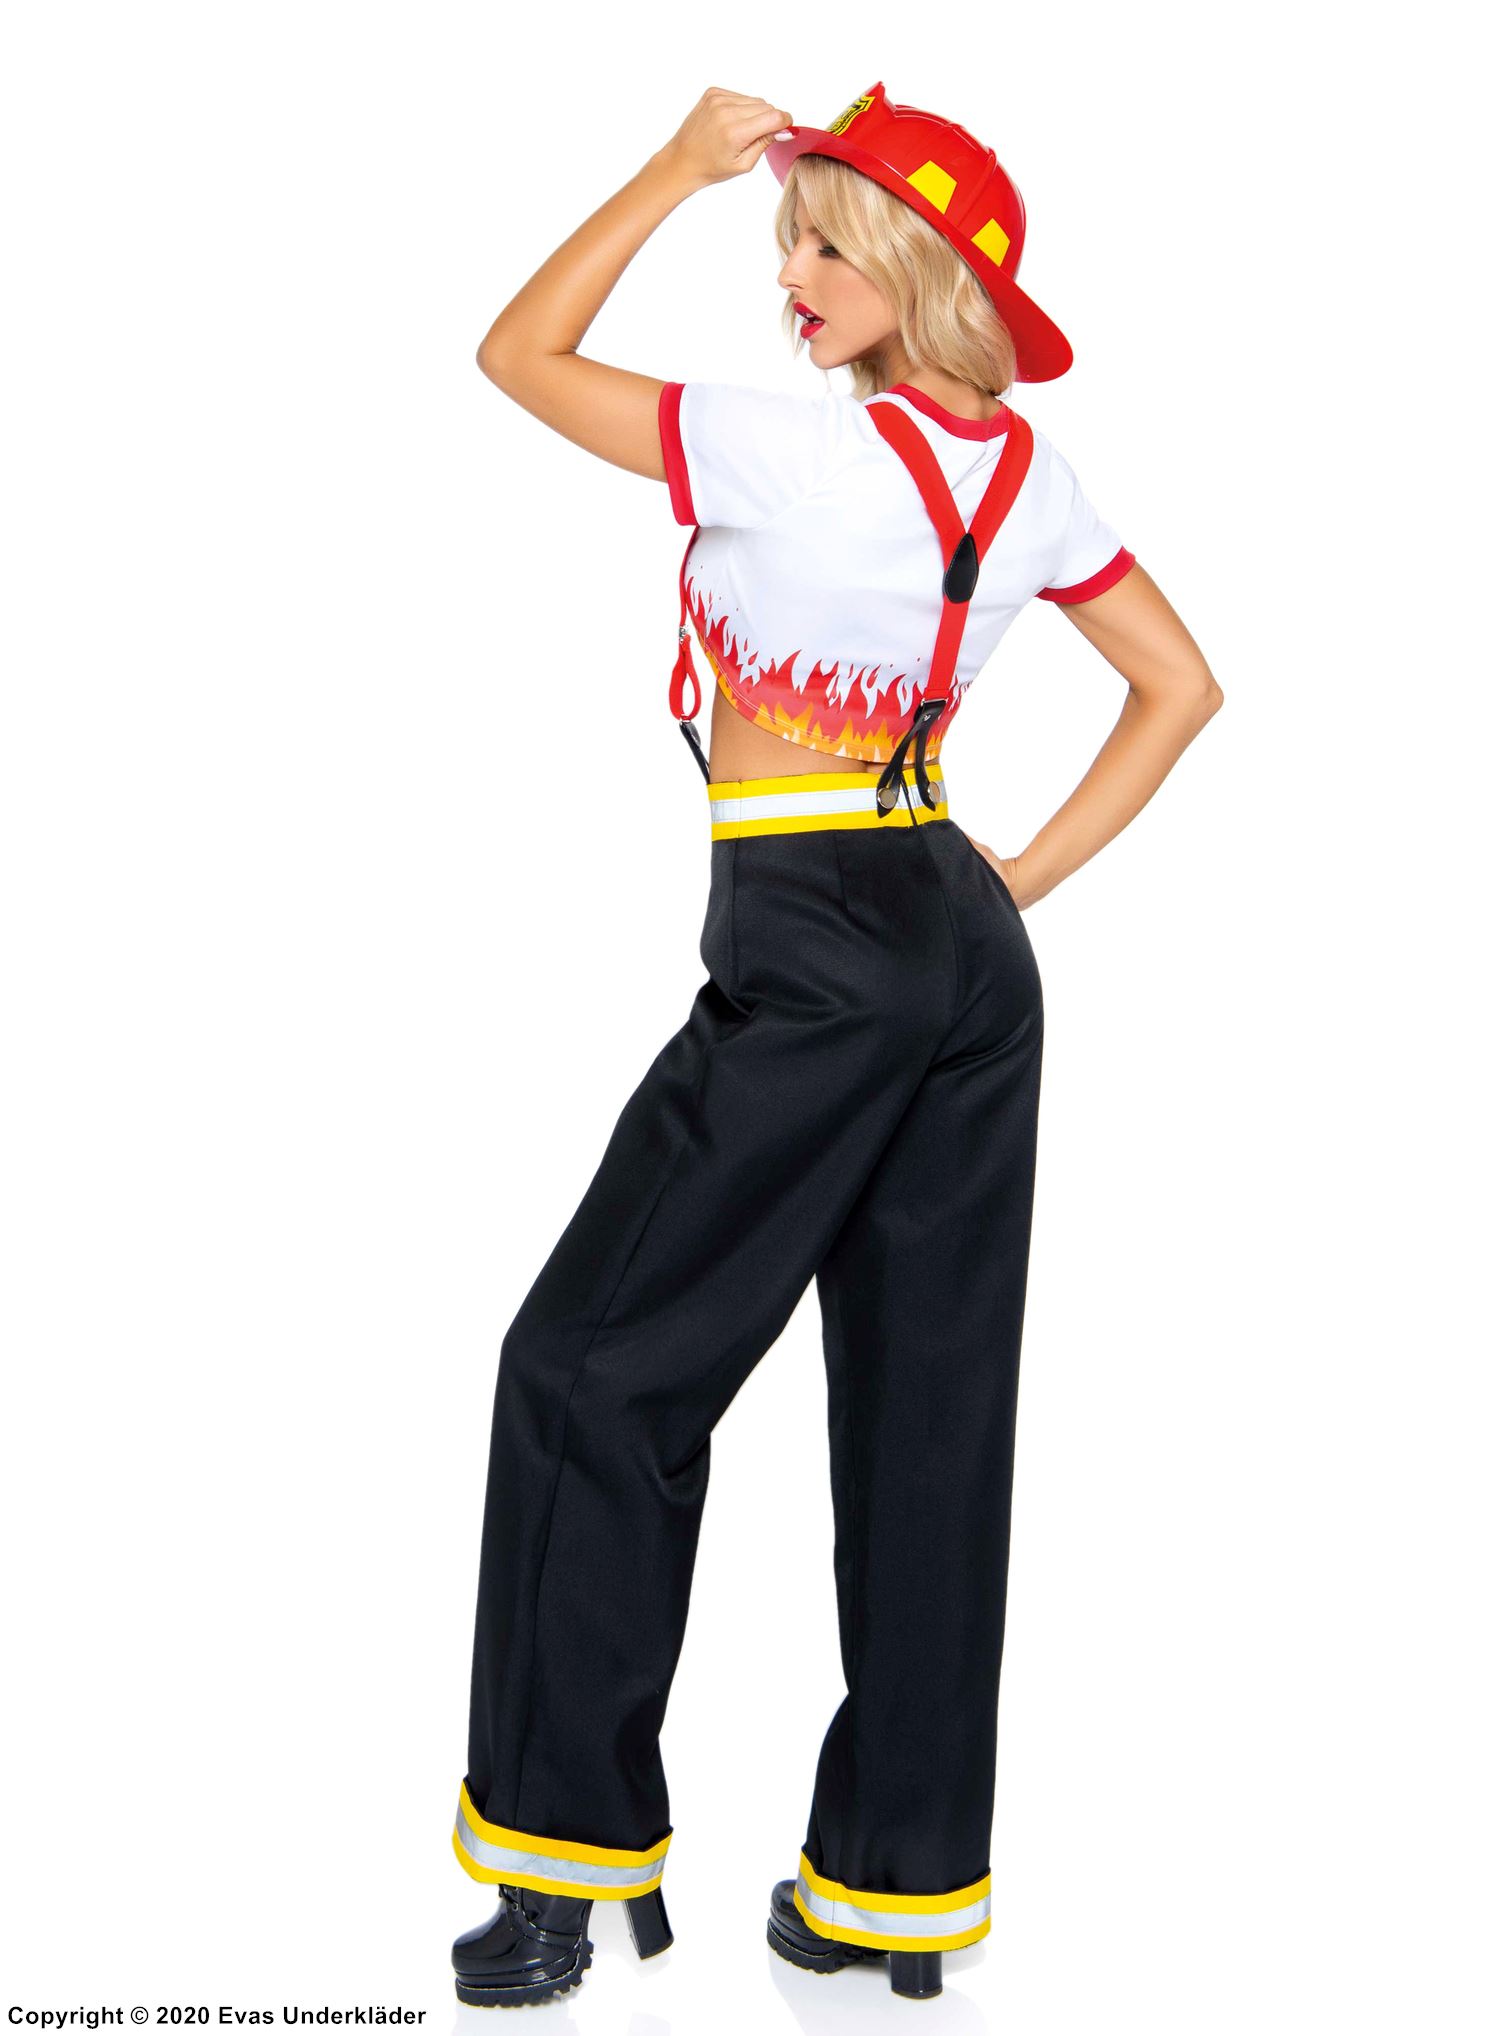 Female fire fighter, costume top and pants, suspenders, flames